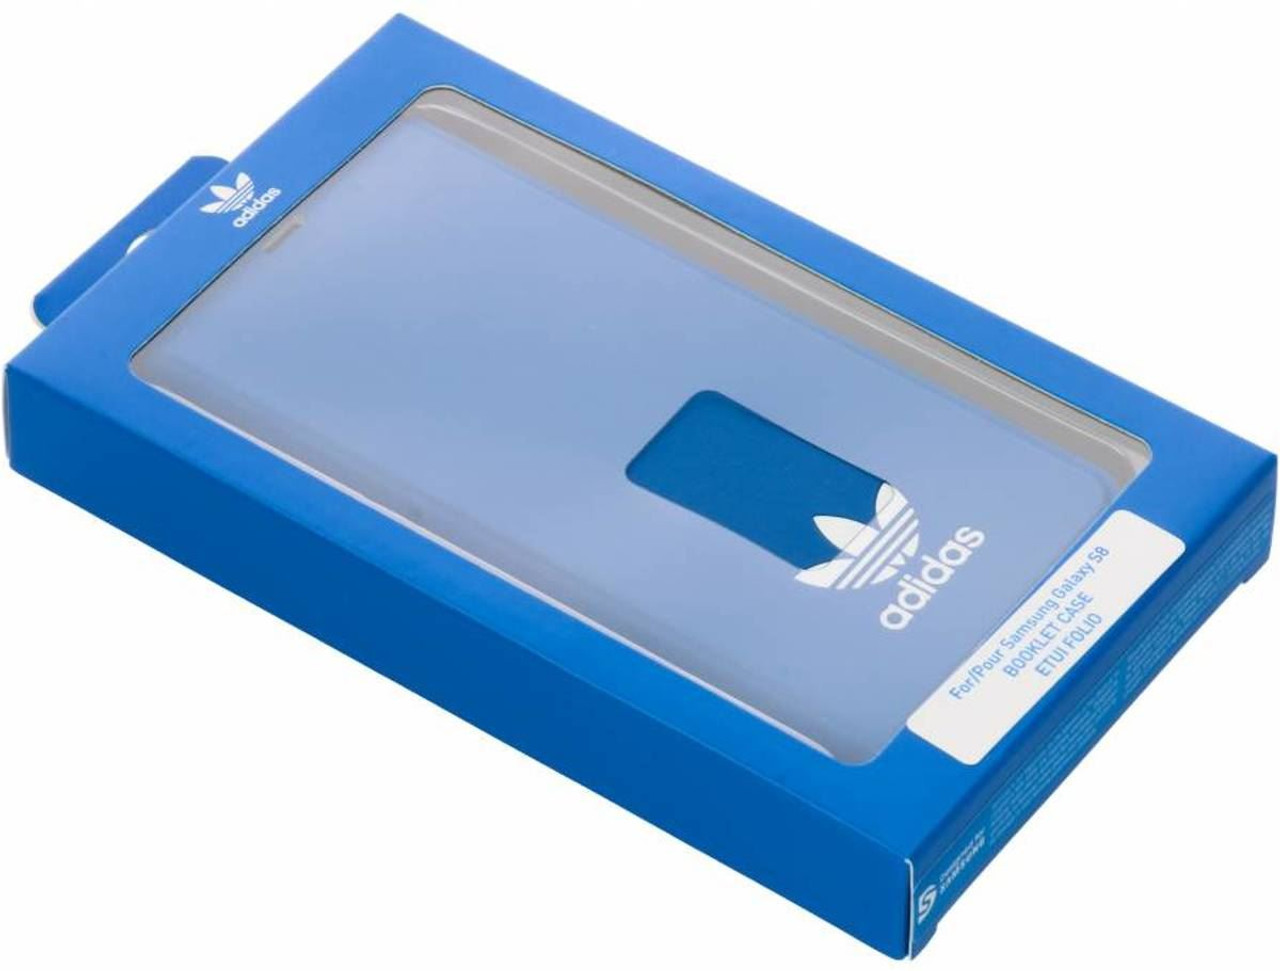 Adidas Originals TPU Flip Booklet Cover with Card Holder for Samsung Galaxy S8 - Bluebird / White - Sunny Savers Ltd